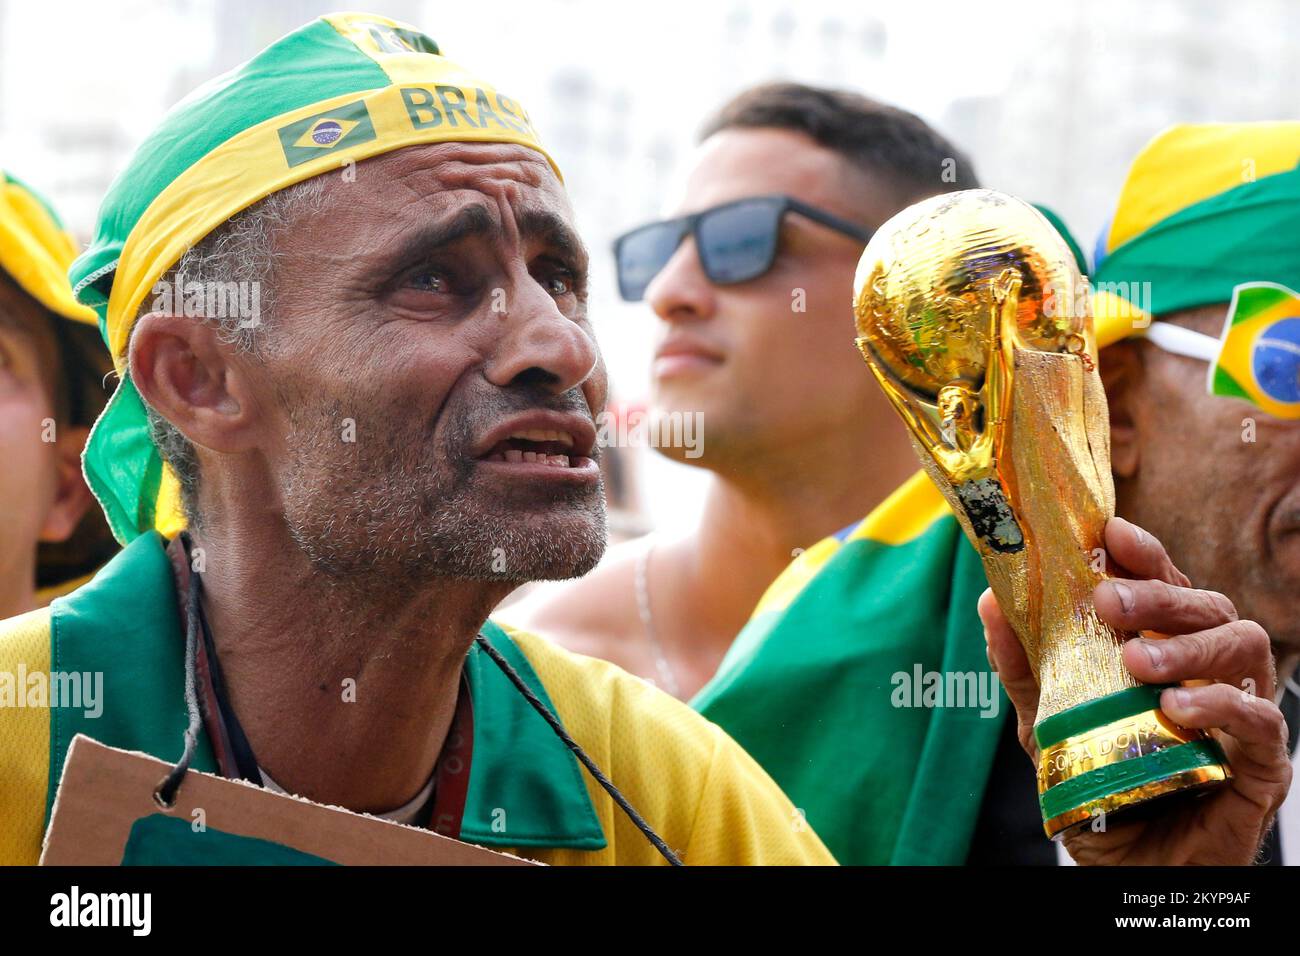 Brazilian fans supporting national soccer team playing Fifa World Cup at Fan Festival arena Stock Photo